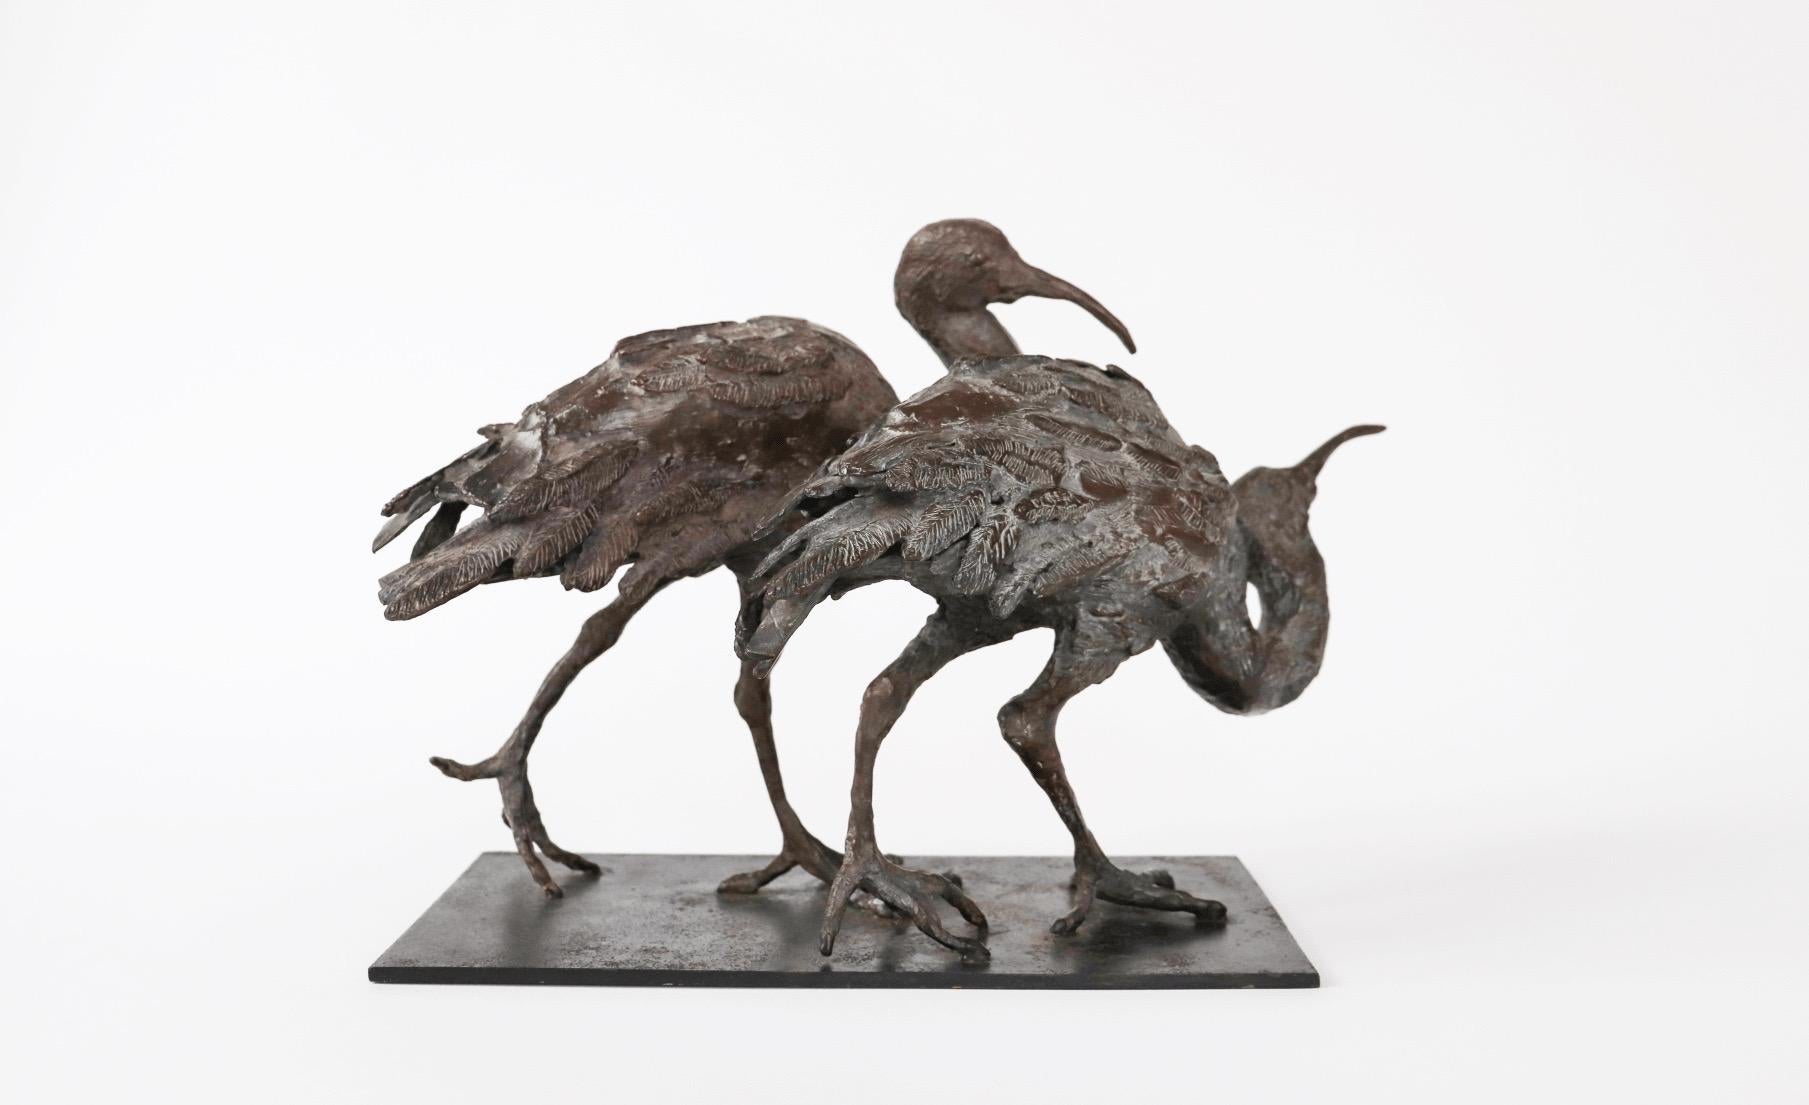 Two Ibises by Chésade - Bronze animal sculpture, birds, realistic, expressive For Sale 1